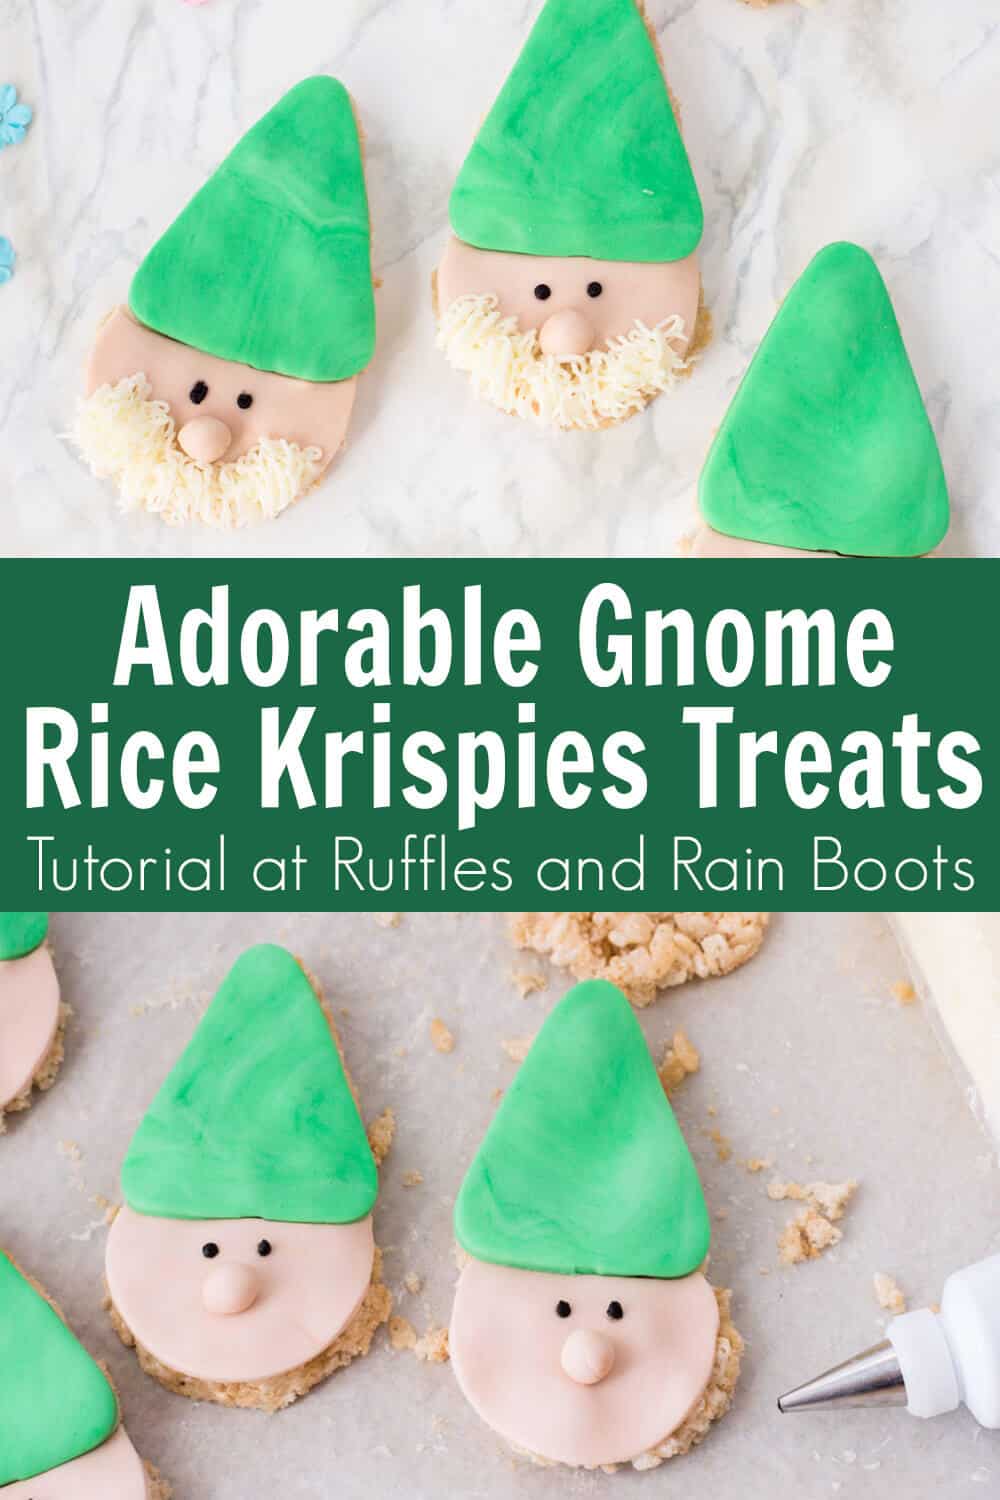 Vertical photo collage of adorable green hat gnome cereal treats with text which reads adorable gnome rice krispies treats.